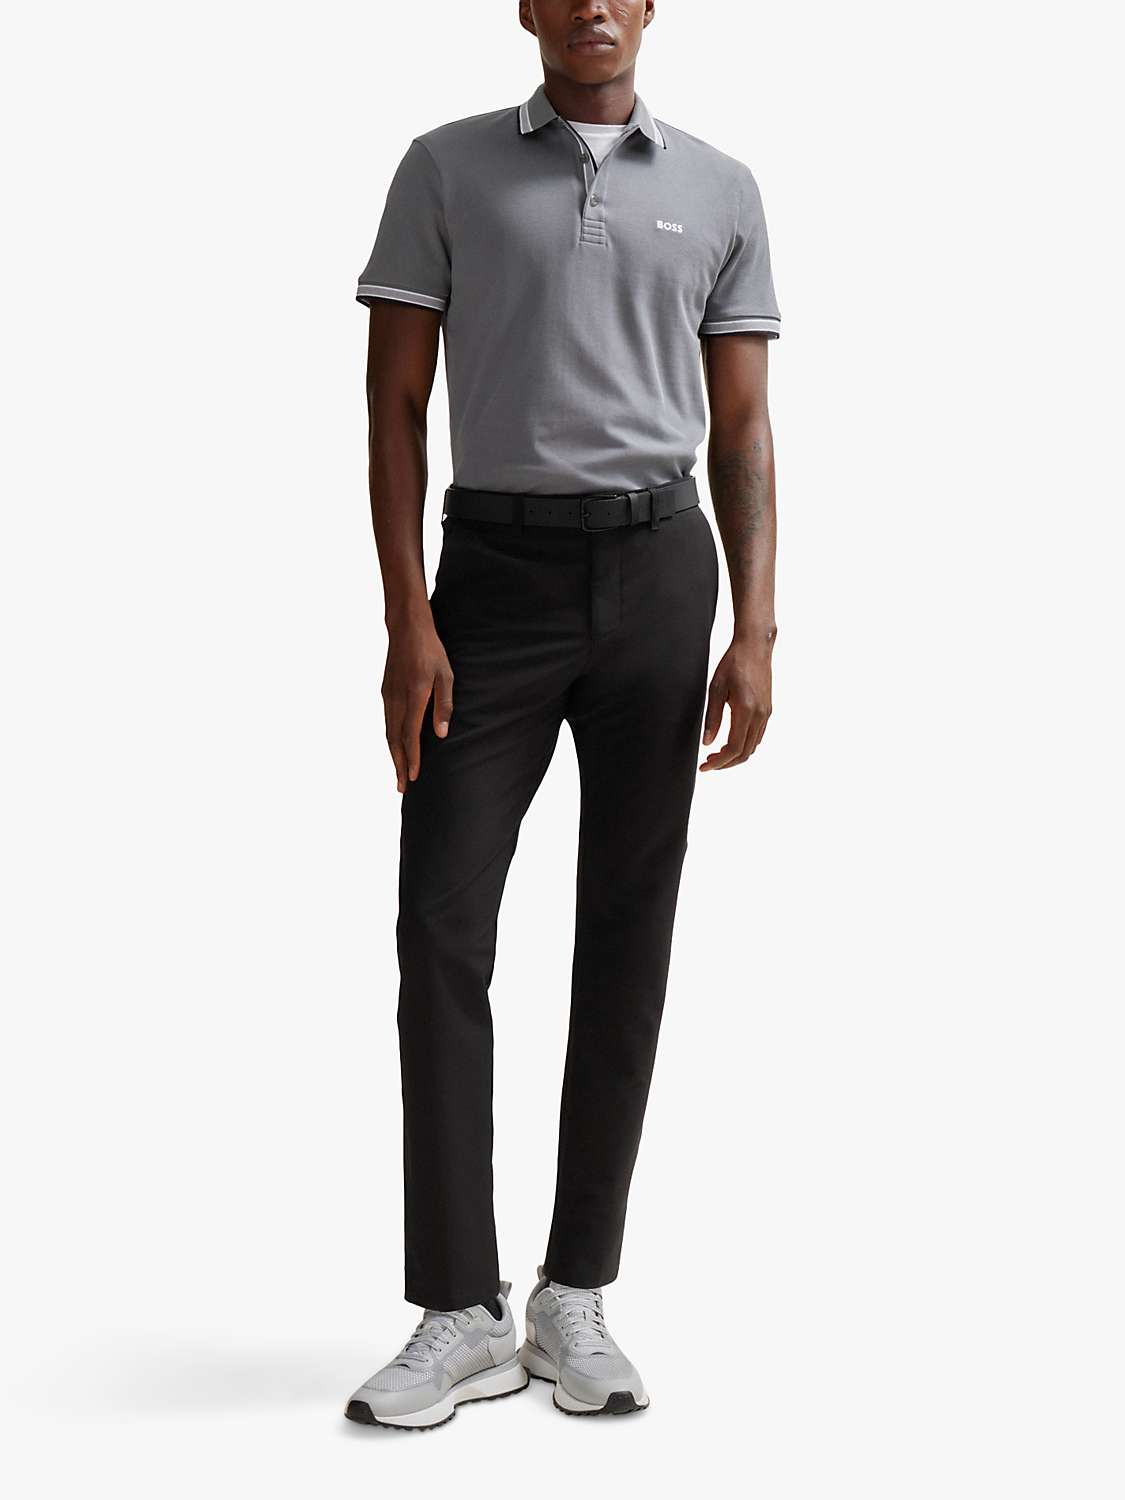 Buy BOSS Paddy Pique Short Sleeve Polo Shirt, Grey Online at johnlewis.com